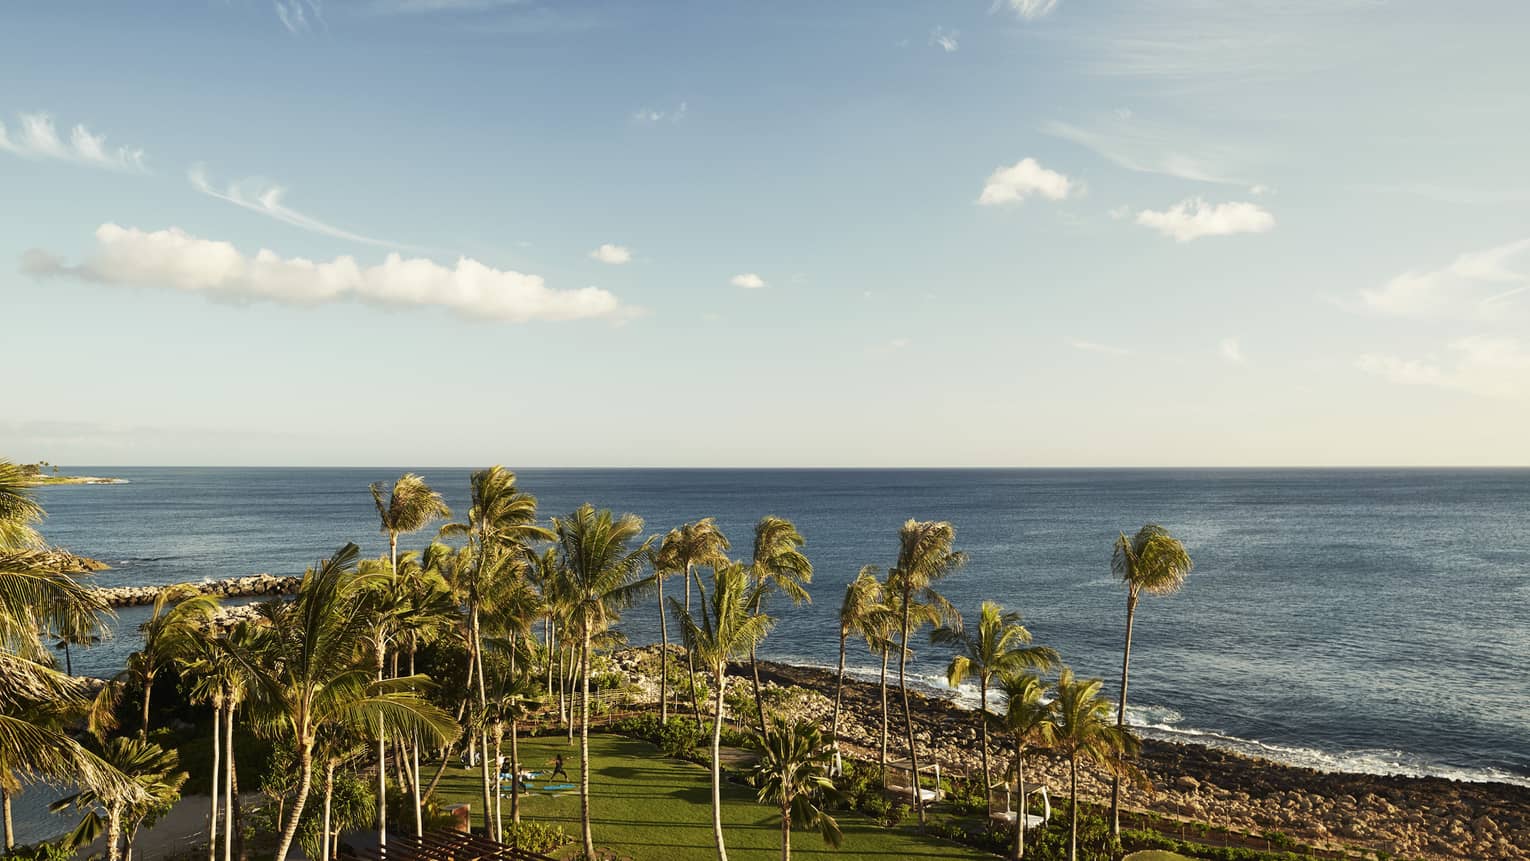 Sweeping view over tall palm trees, rocky shoreline by ocean, waves 